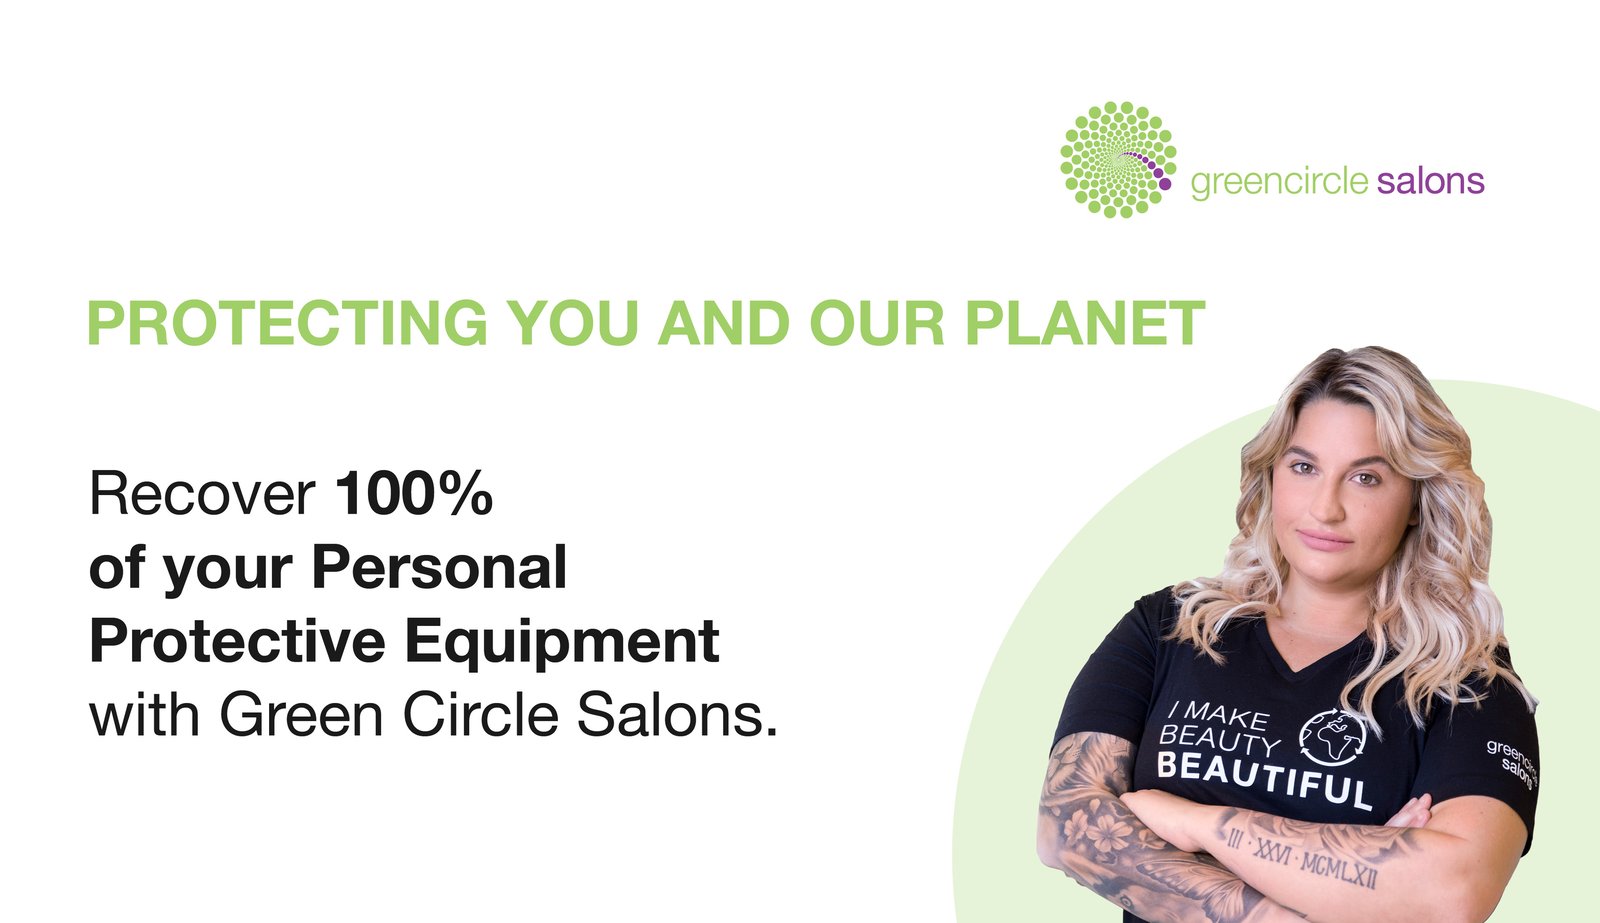 Recover 100% of your Personal Protective Equipment with Green Circle Salons